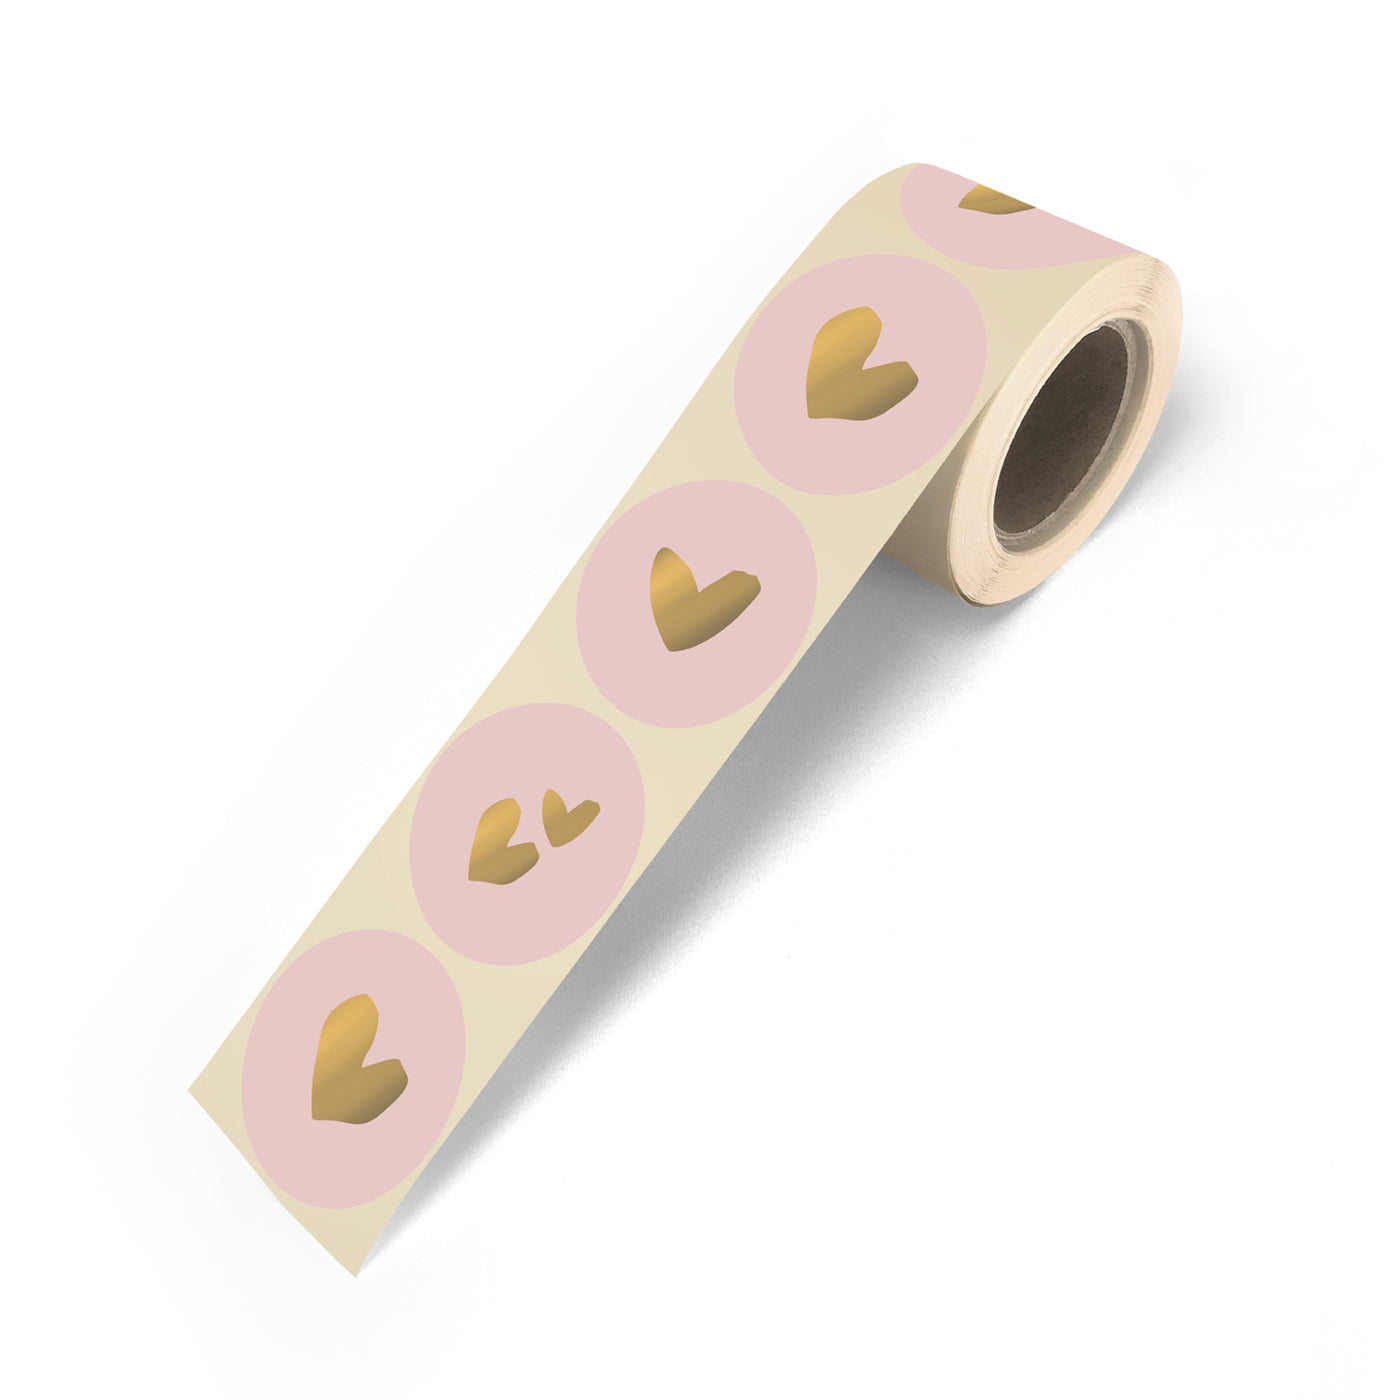 Stickers - Pink Hearts - 10st.